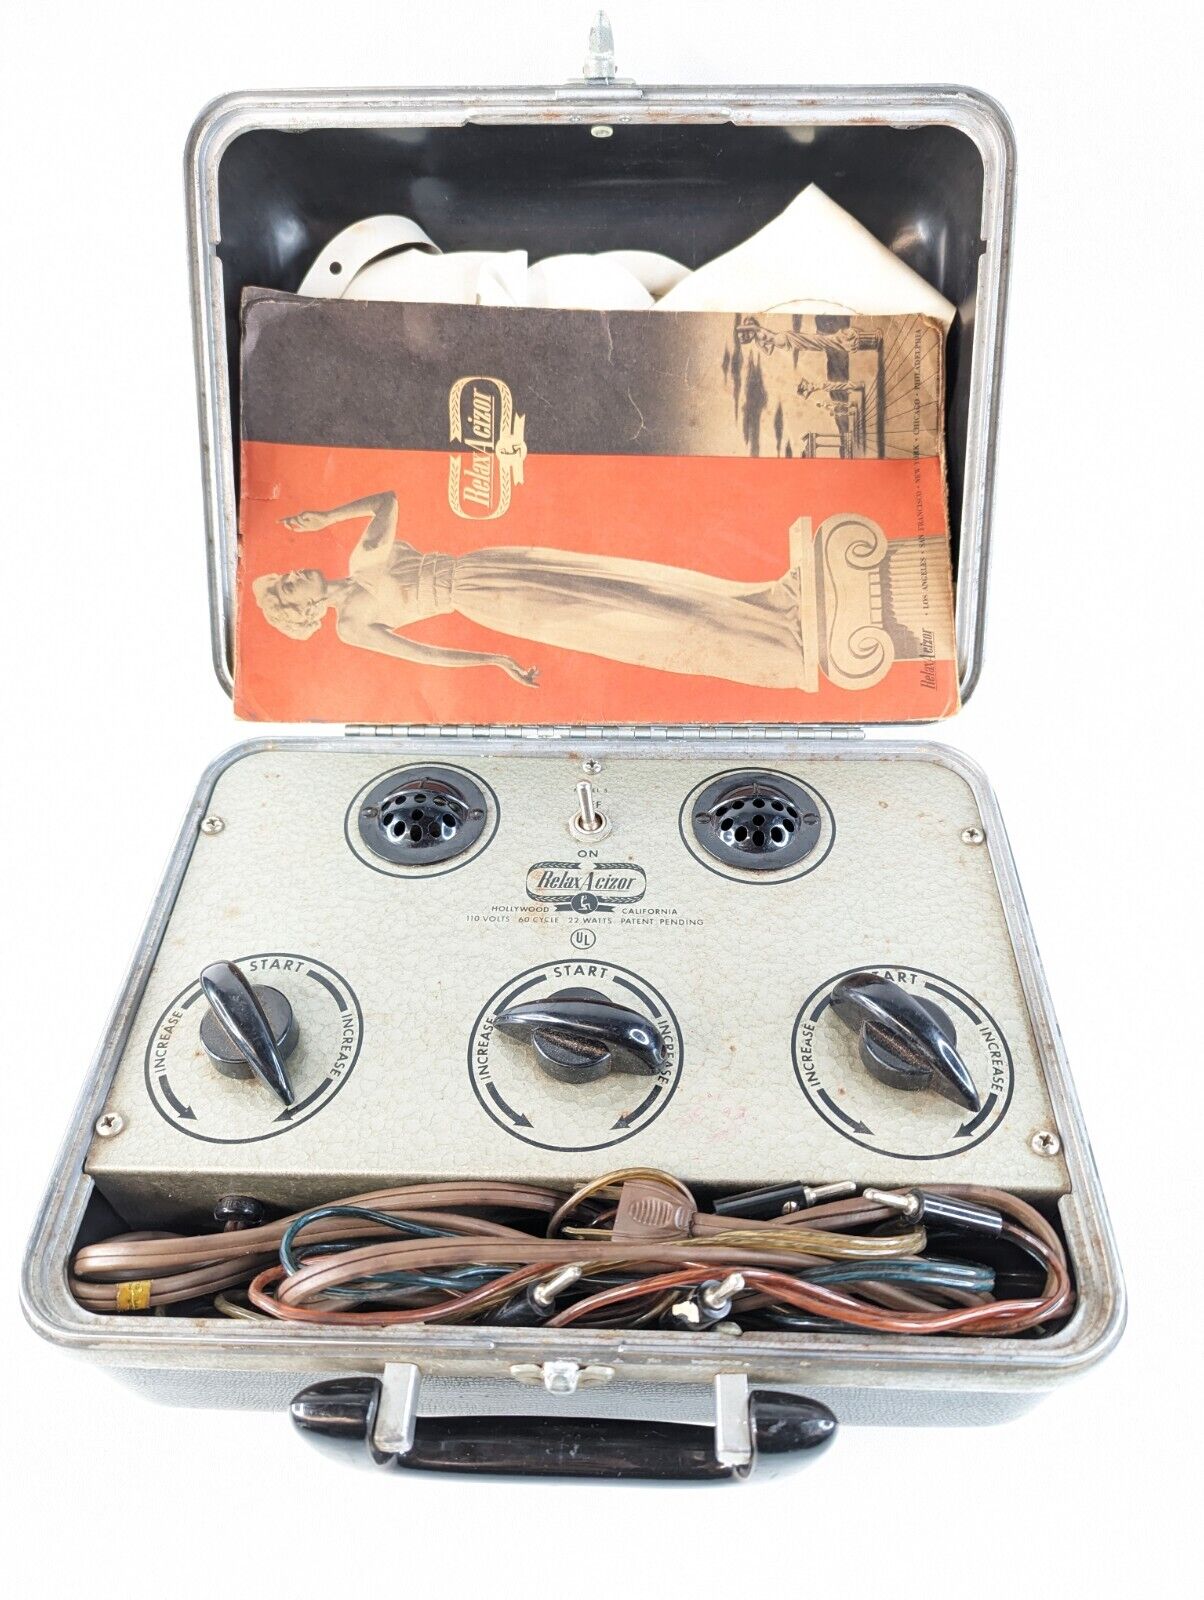 Vintage 1950\'s Relax-A-Cizor Machine Electric Muscle Stimulator Device